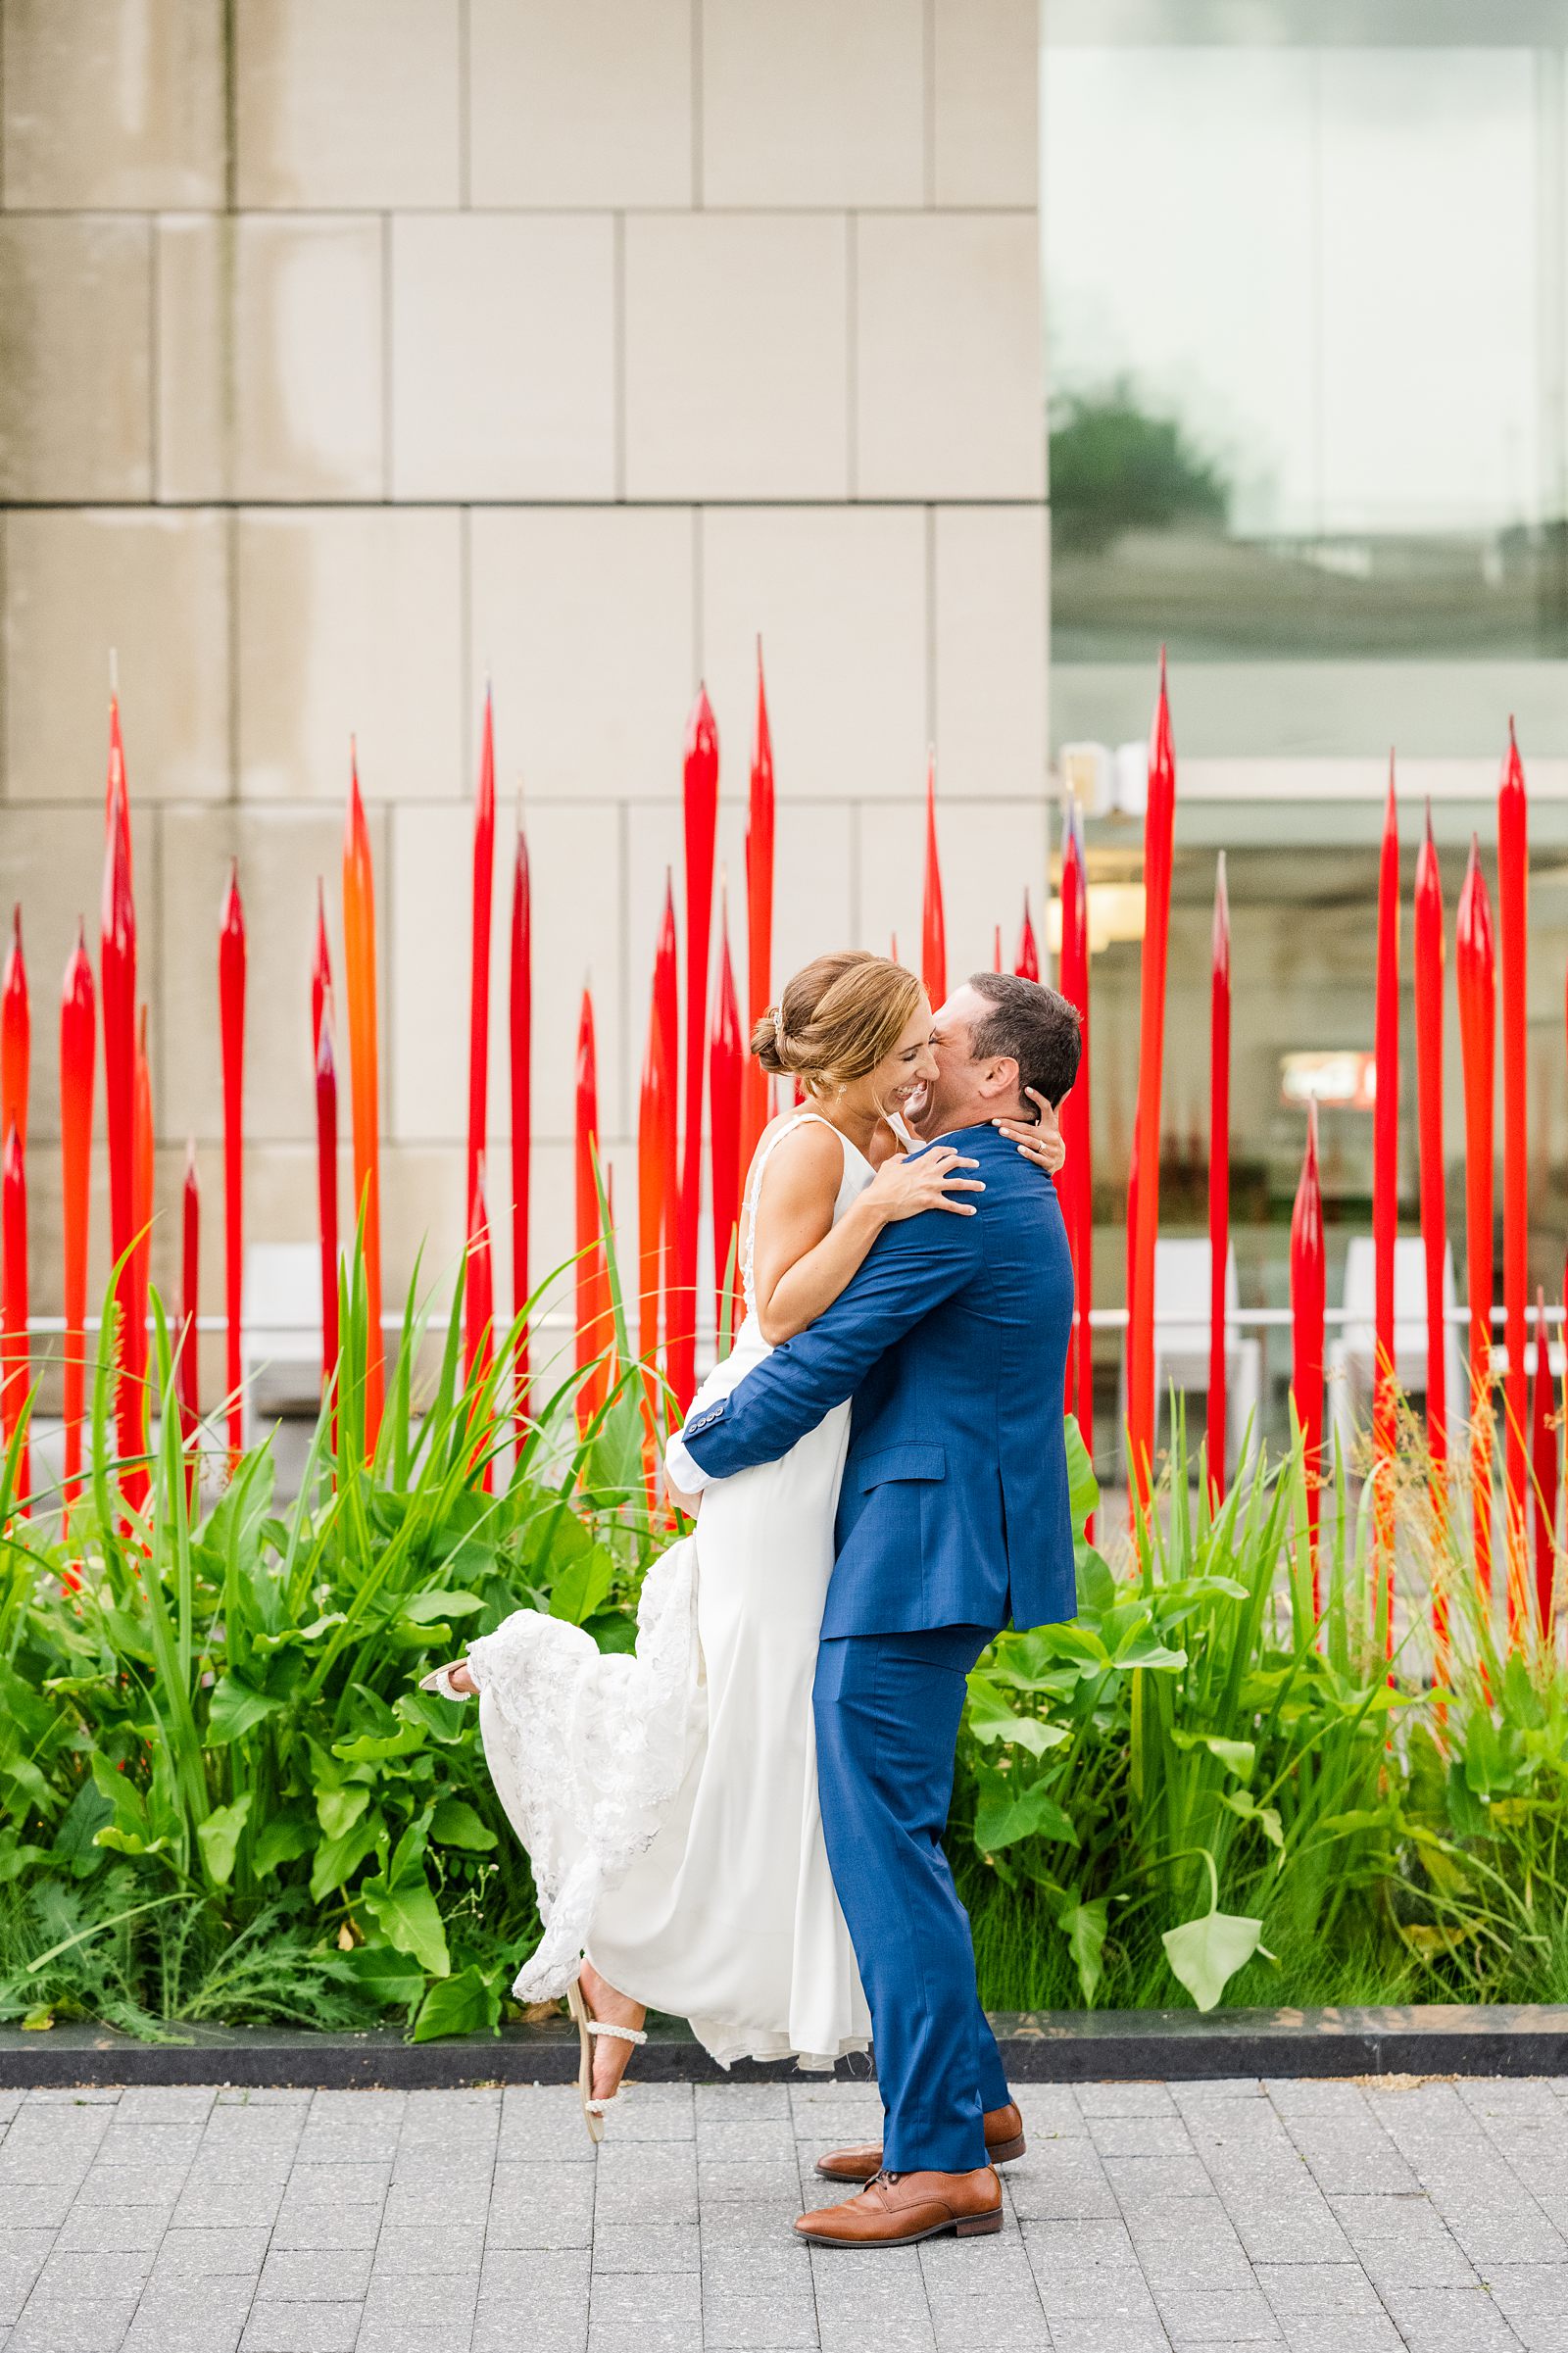 Bride and Groom Portraits at Summer VMFA Wedding by richmond wedding photographer Kailey Brianne Photography  